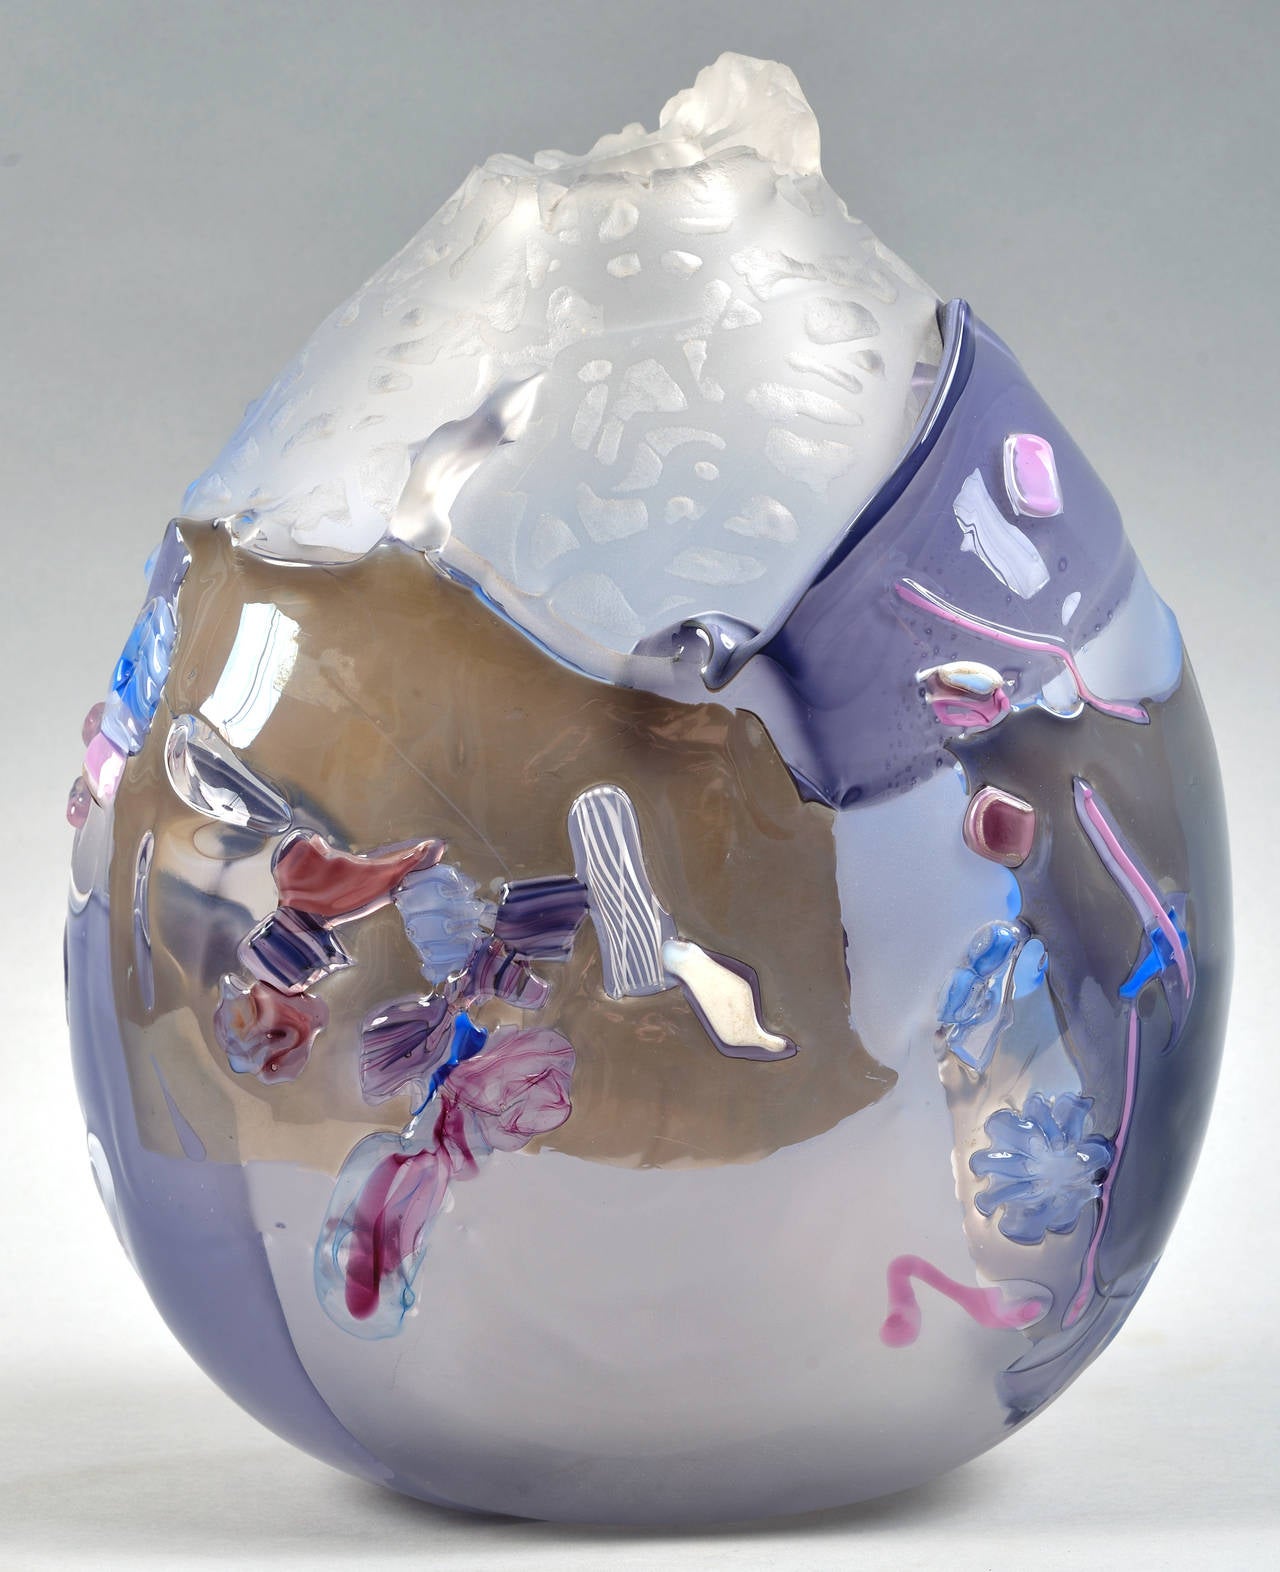 Glass vase by the artist Judson Guerard,
Chaos series.
Etched signature on the bottom Guérard 2002.
Height 30.5 cm (12